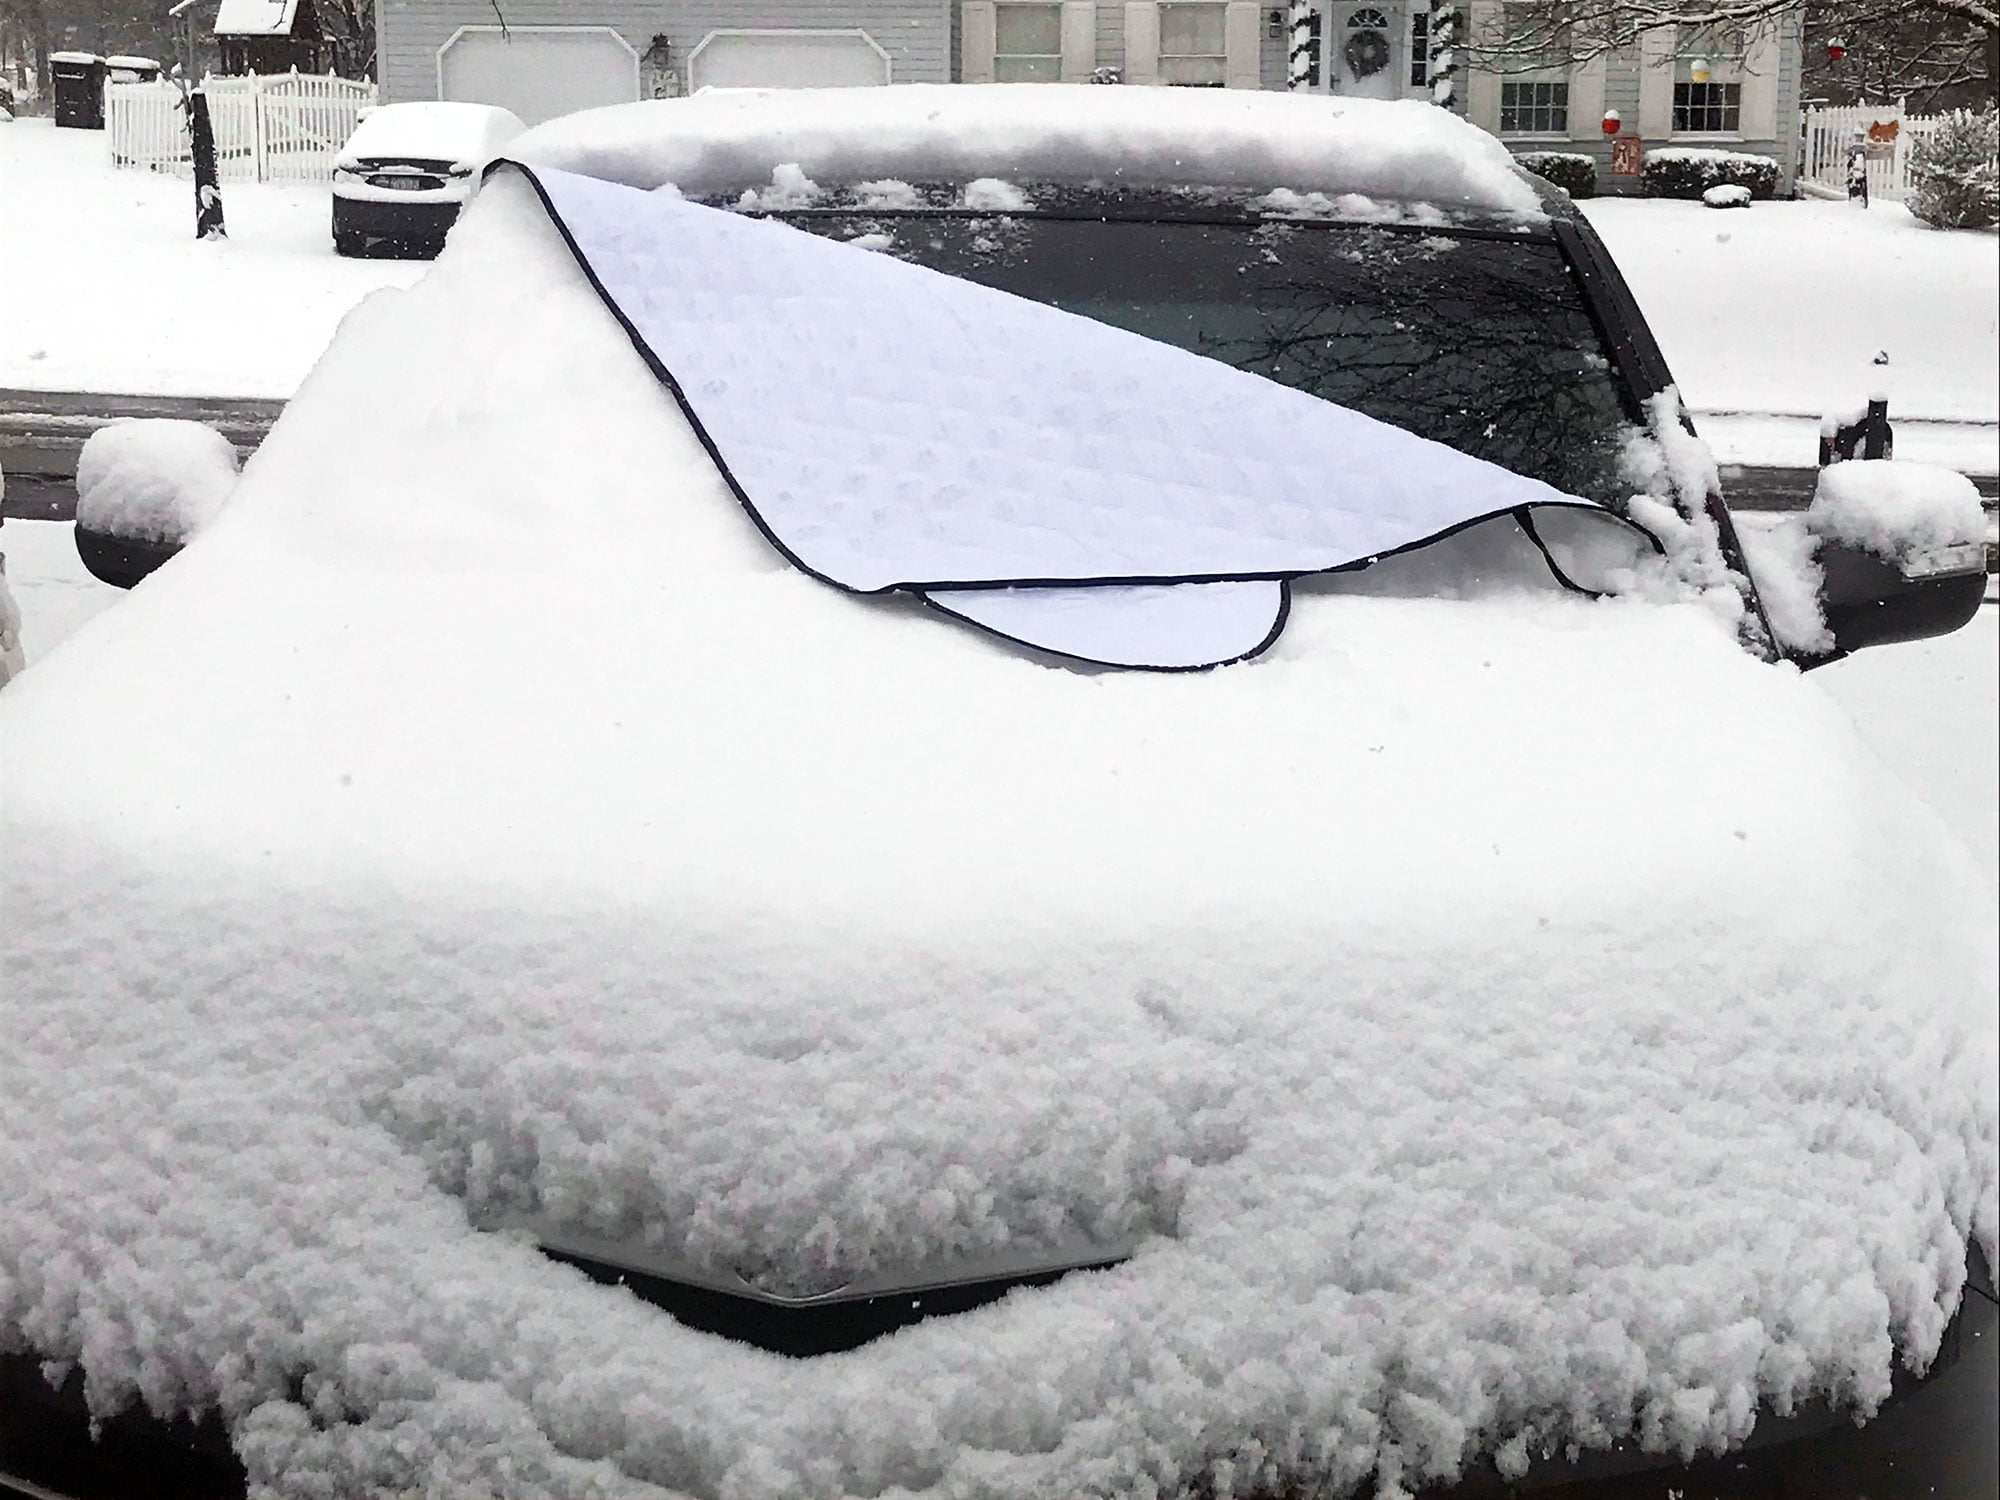 Windshield Snow Cover & Wiper Protector - Keep your Vehicle Exterior F –  BriteNway